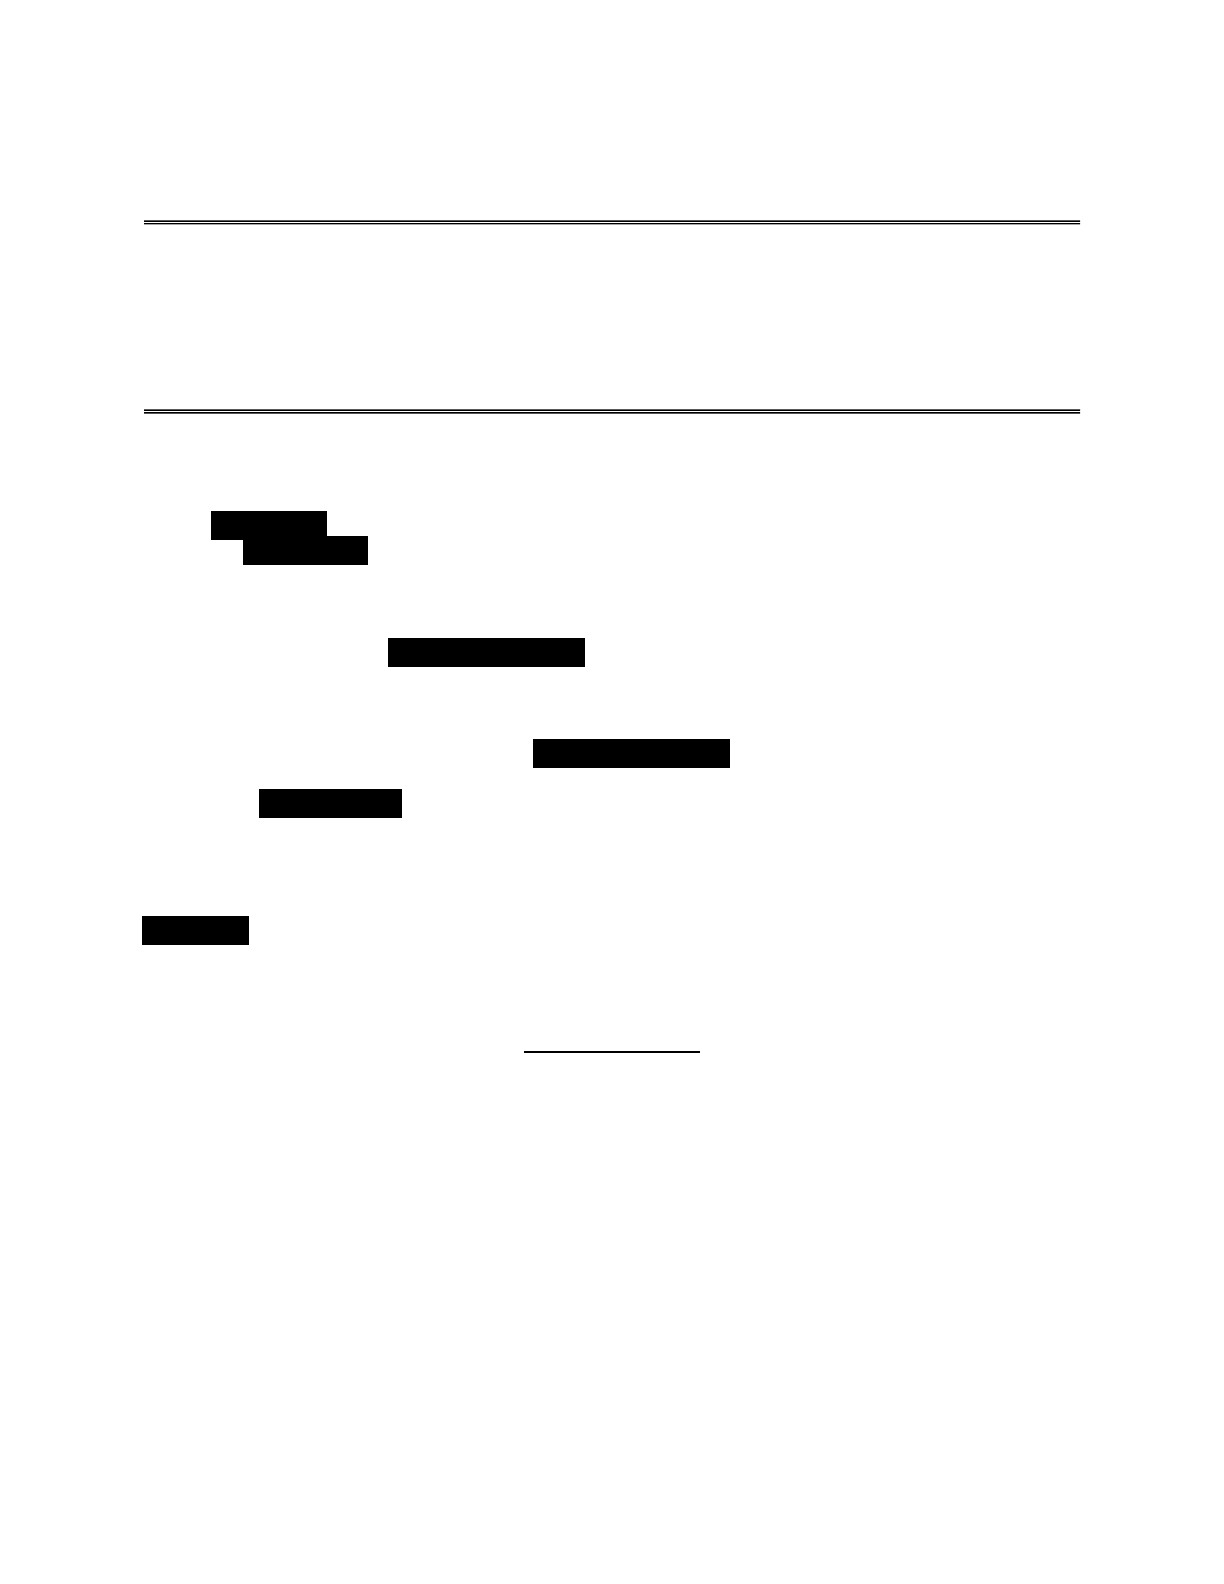 Fax Template Microsoft Word from handypdf.com